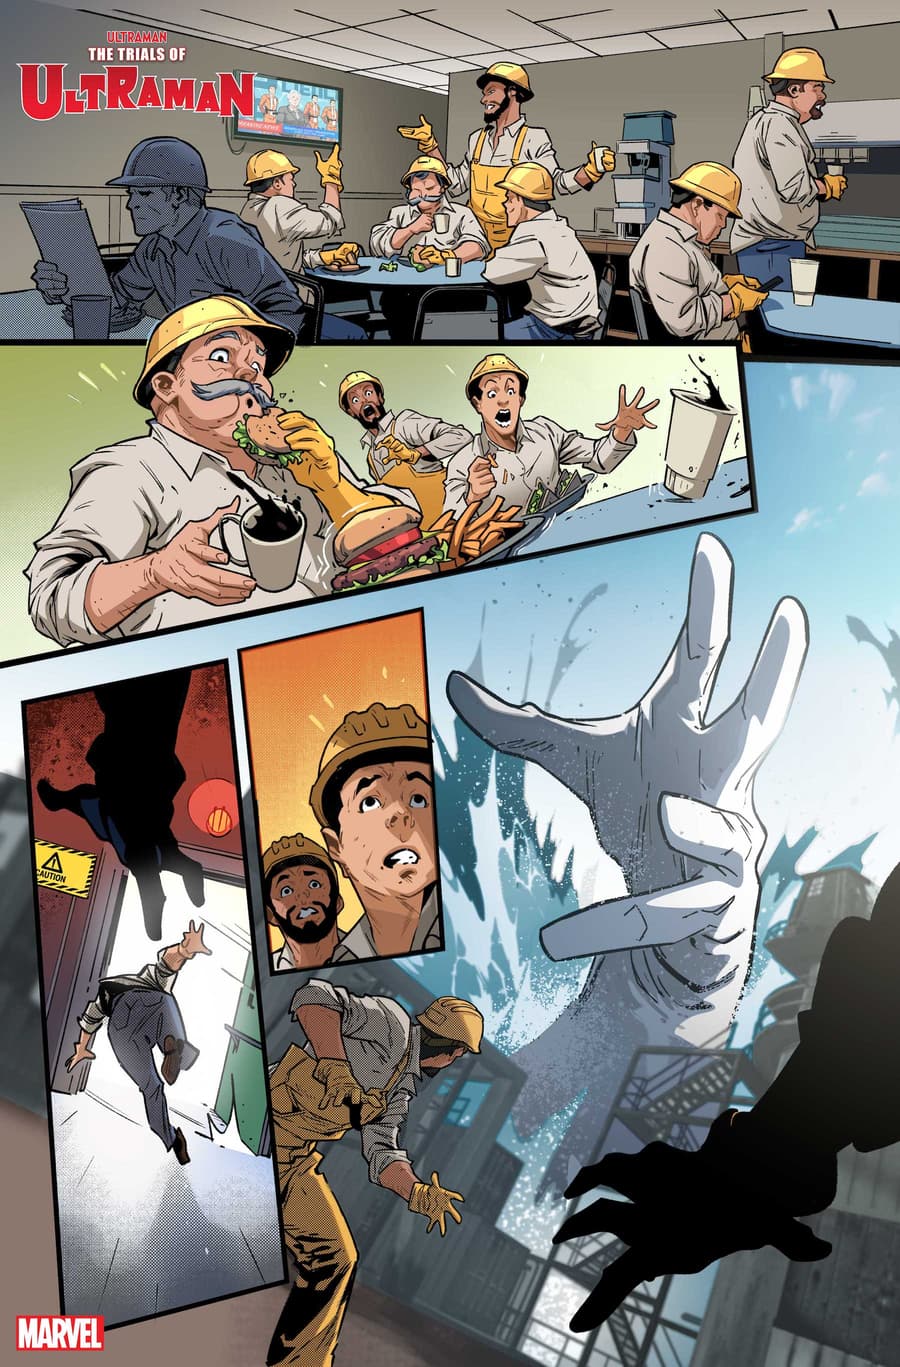 THE TRIALS OF ULTRAMAN #1 preview pages by Francesco Manna with colors by Espen Grundetjern